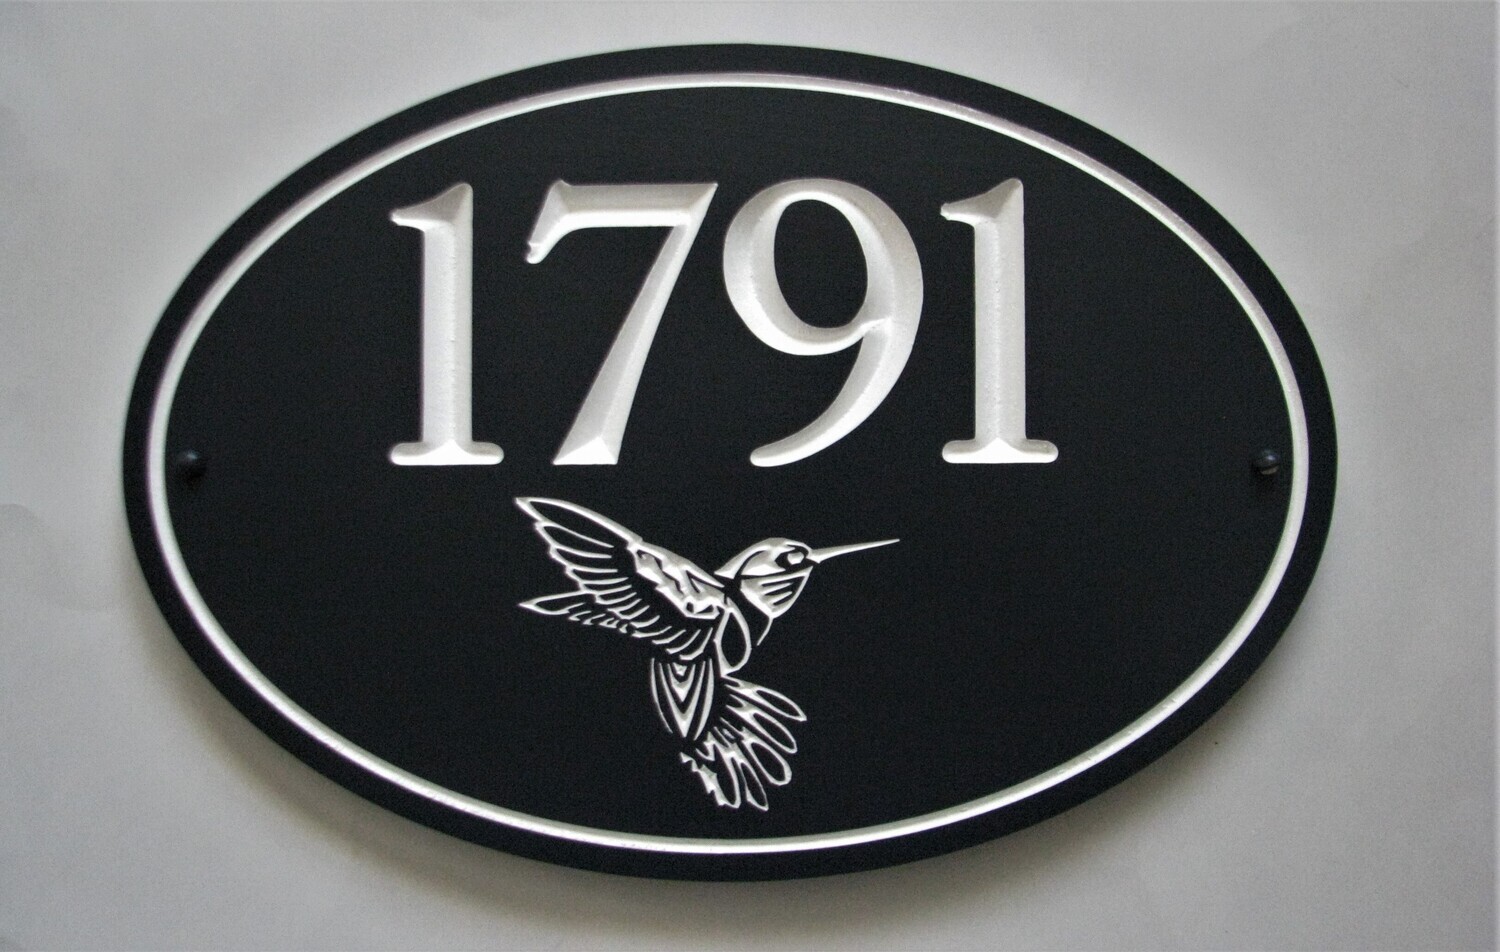 Custom Oval House Number Sign with Carved Hummingbird - House Number Sign Painted With White Carving - Weather Resistant solid 3/4 inch thick PVC.